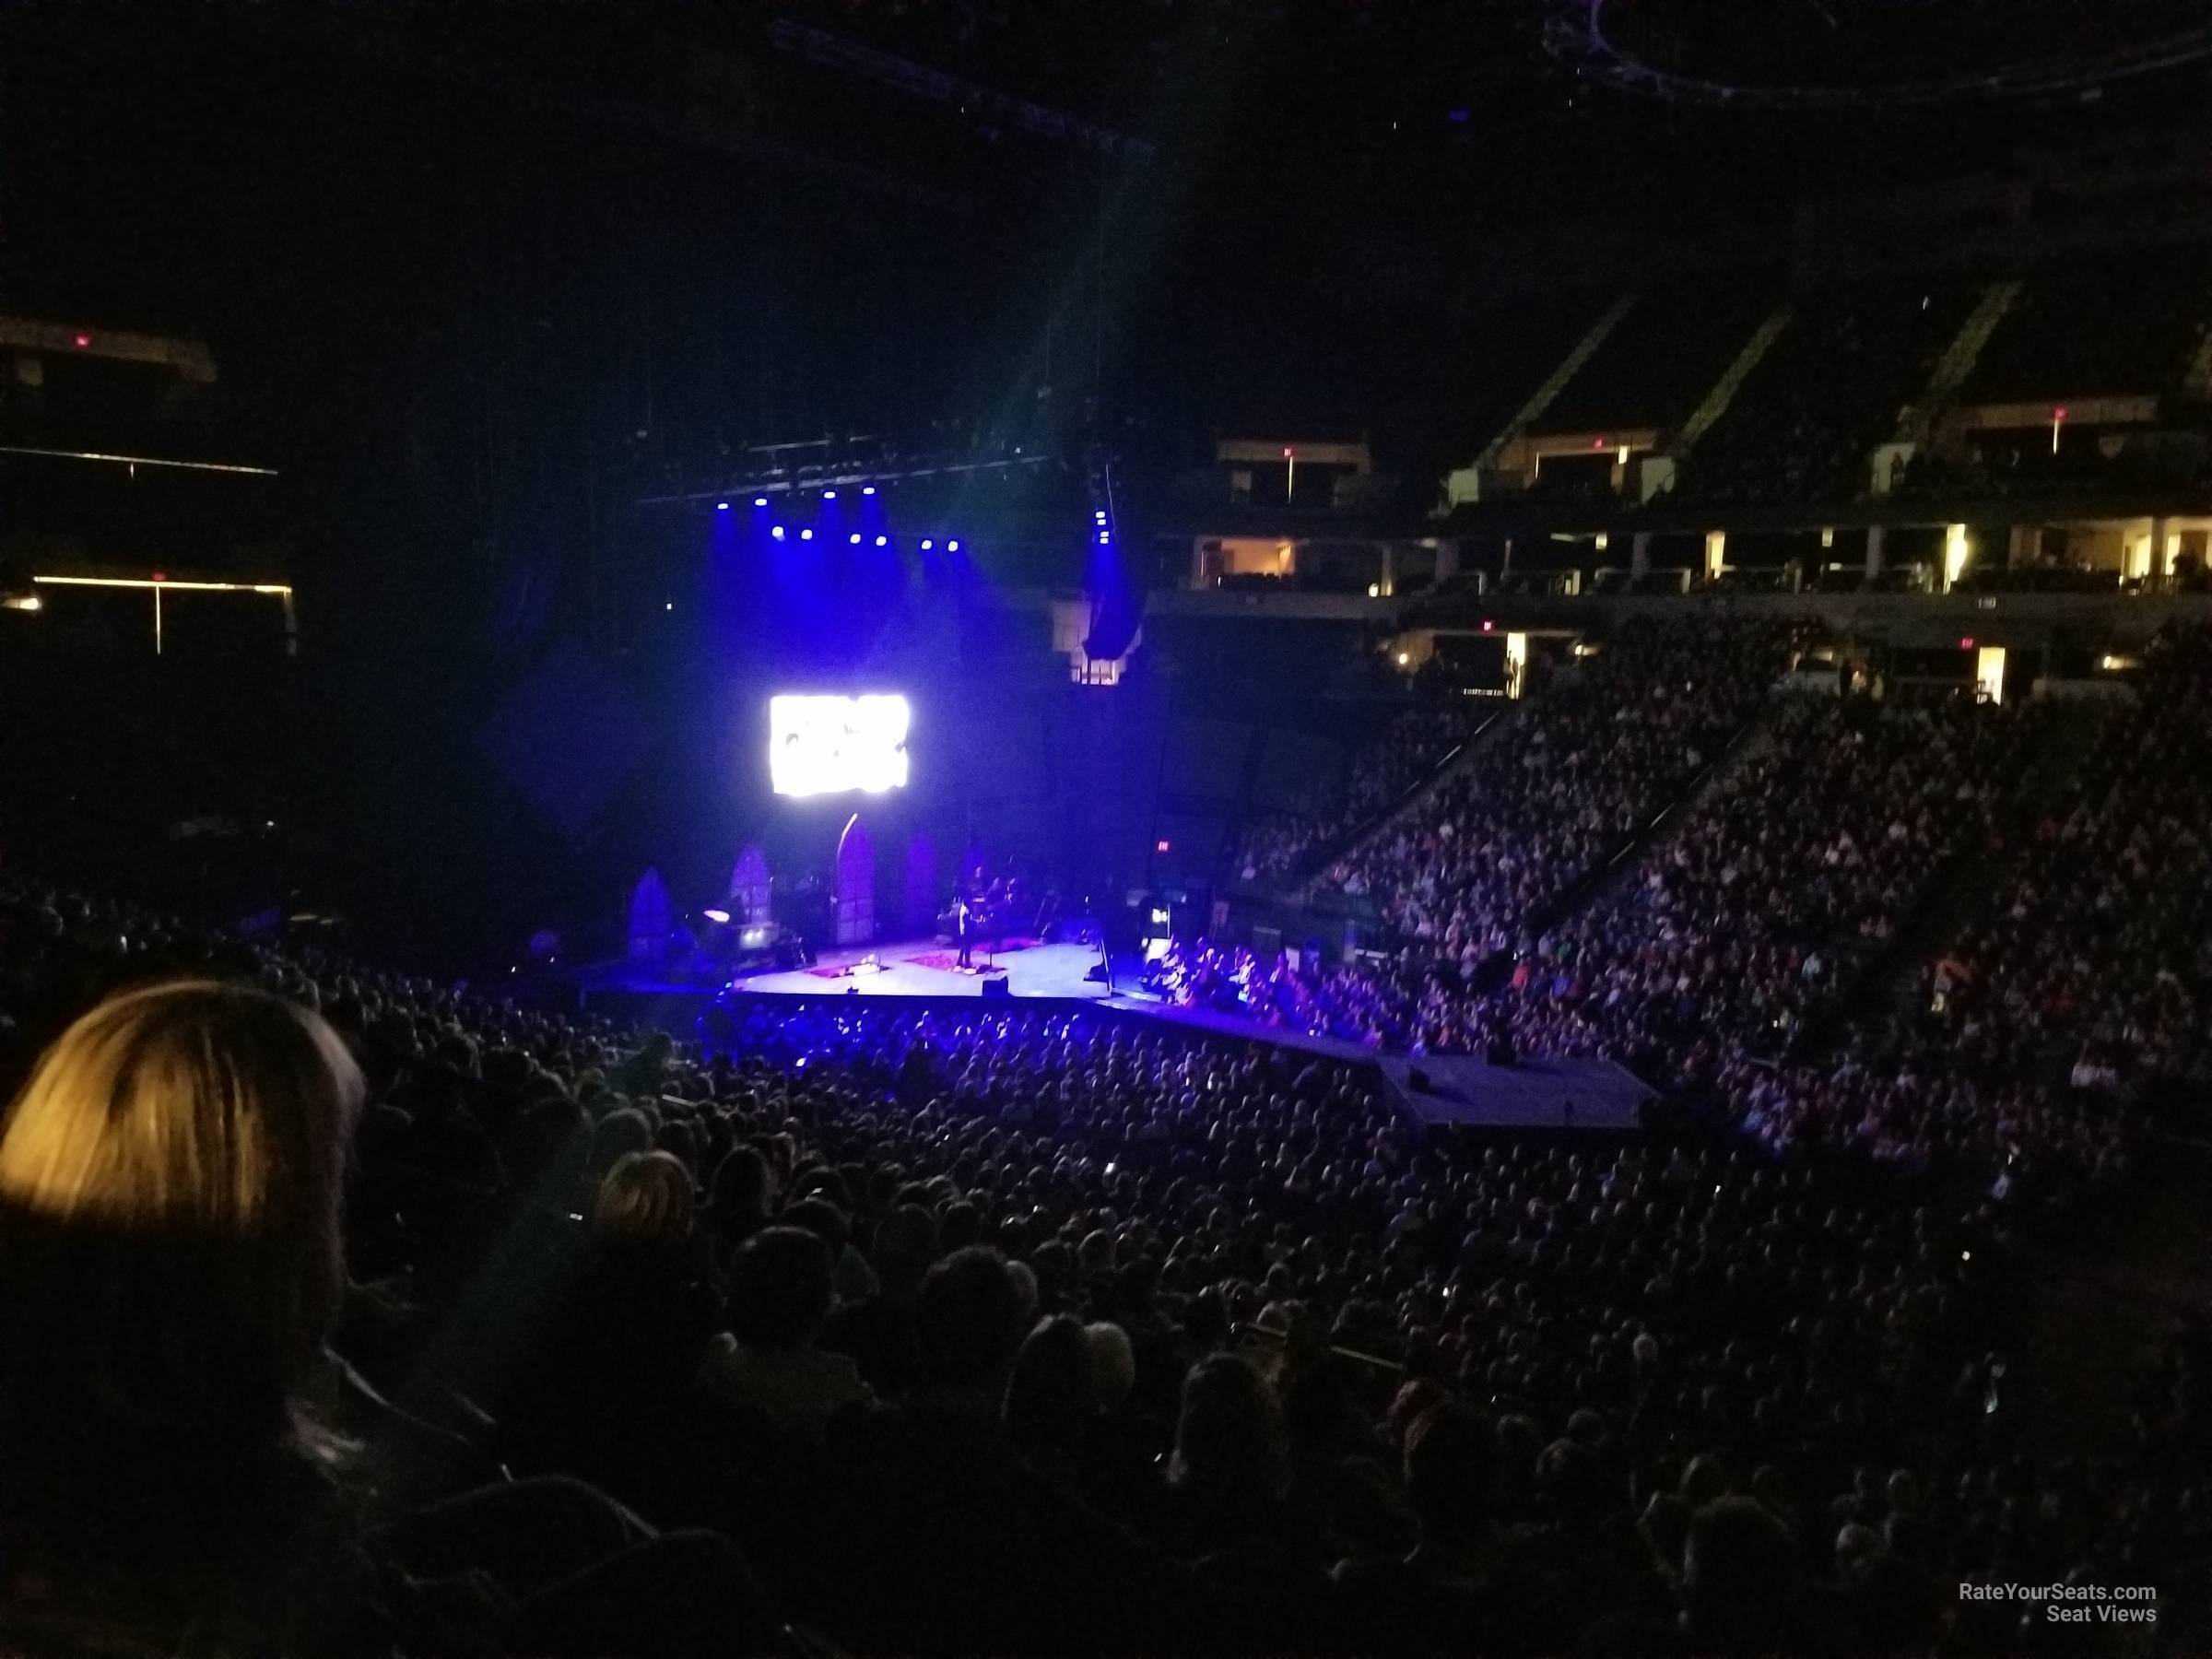 Section 110 at Target Center for Concerts - RateYourSeats.com